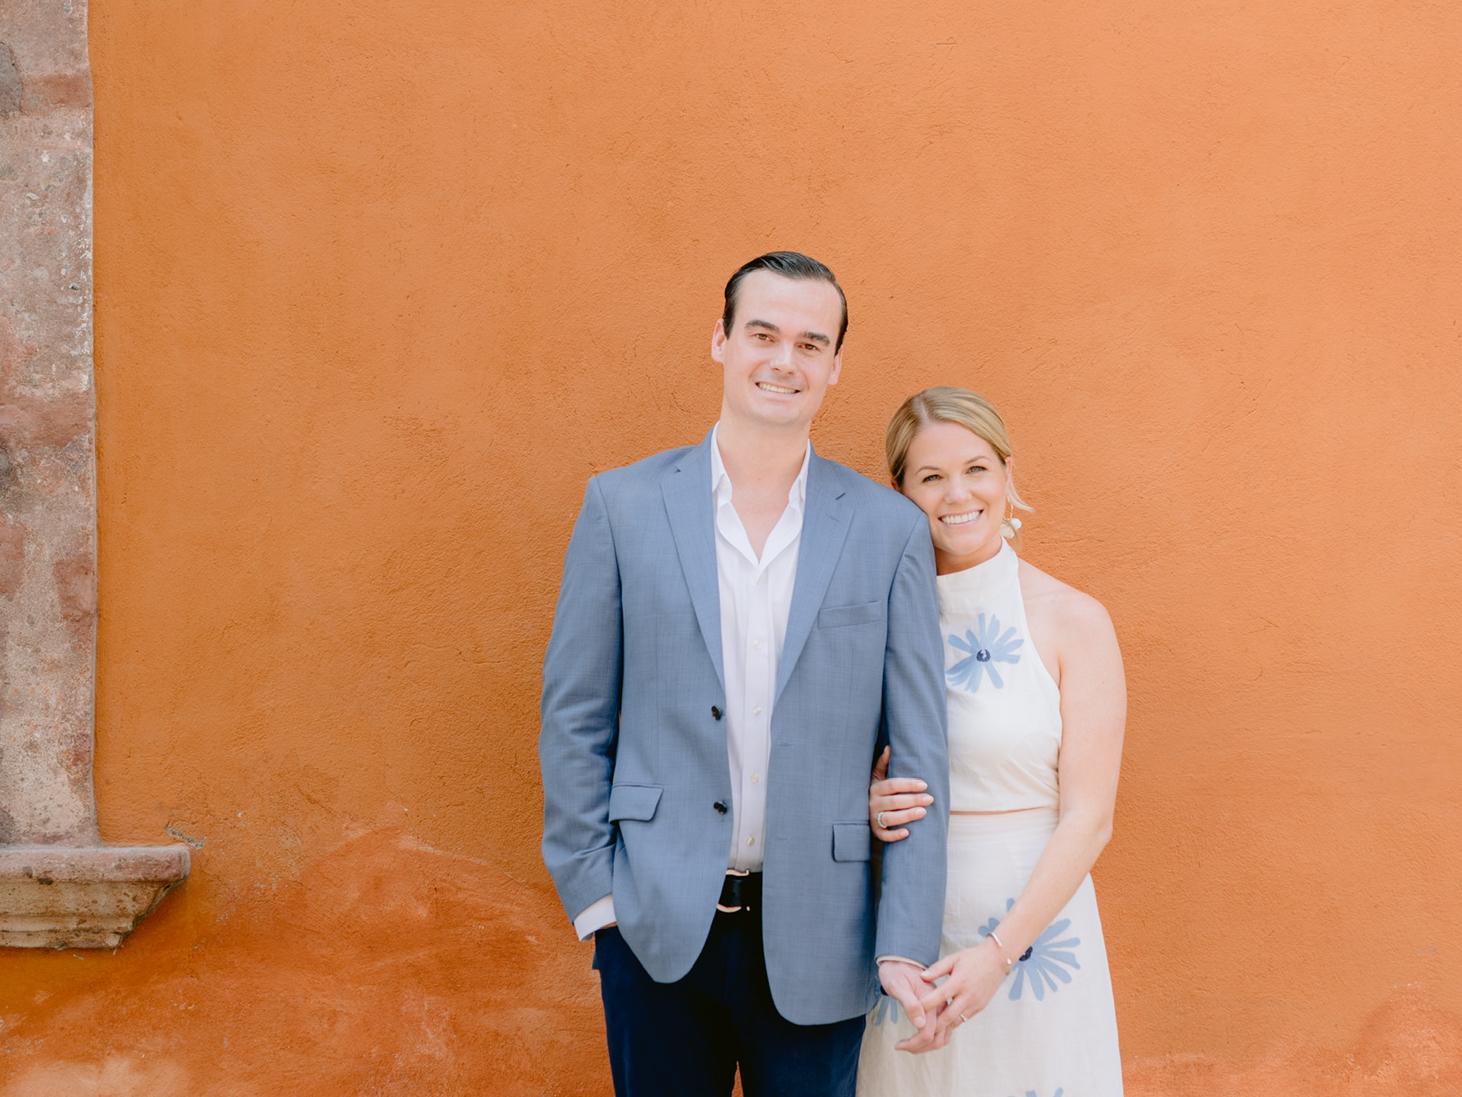 The Wedding Website of Jessie Andrews and James Keady